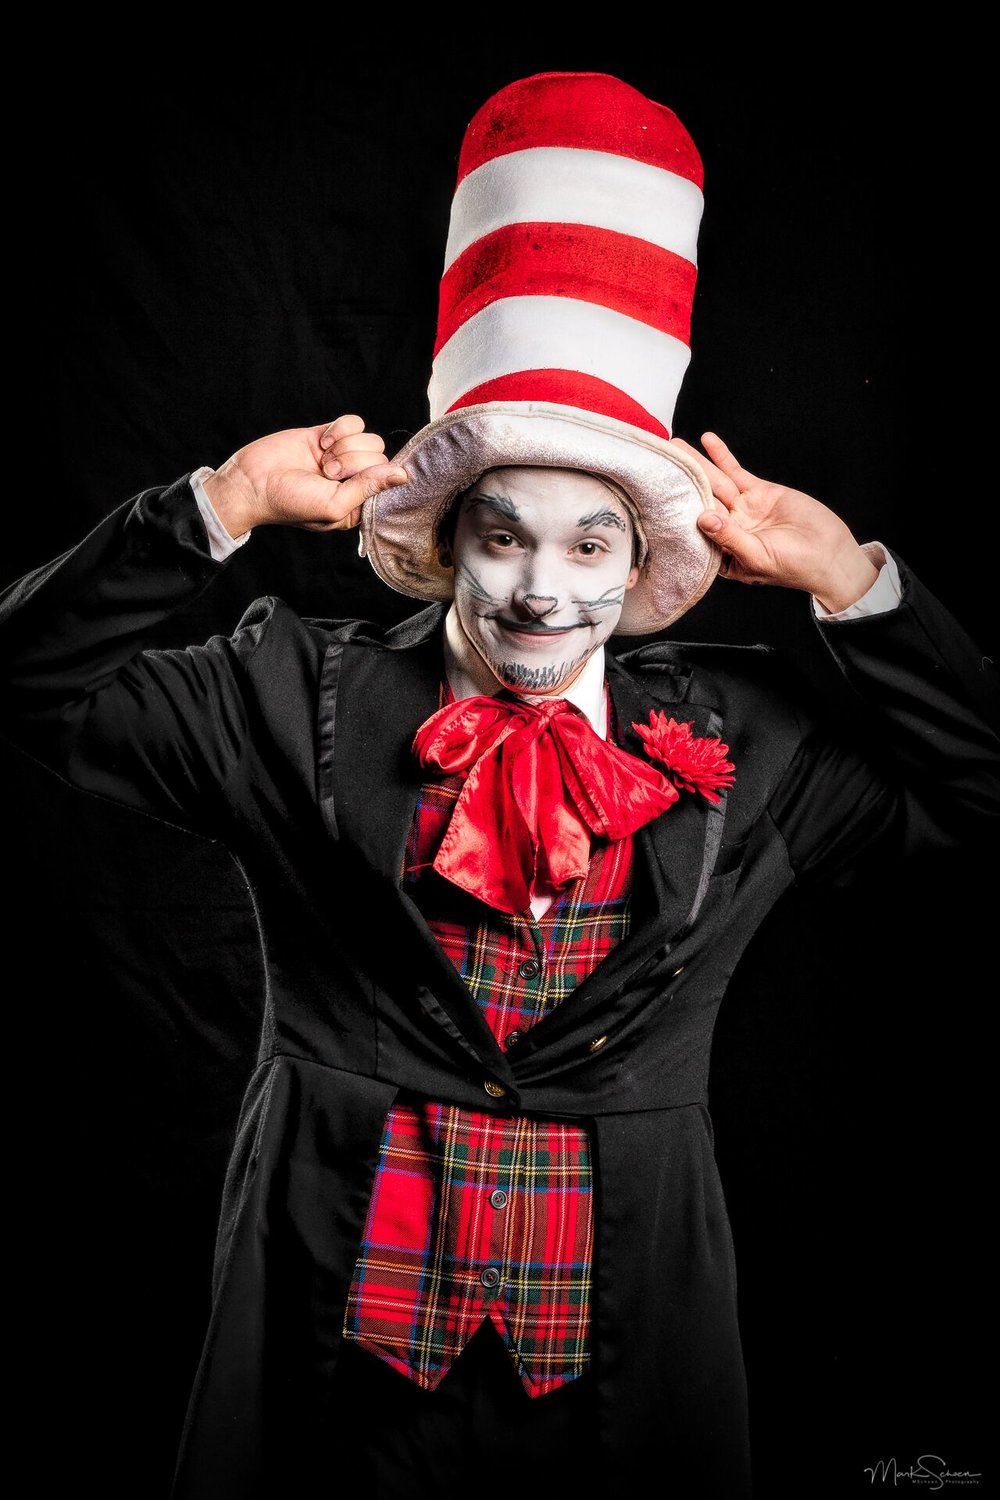 The Cat in the Hat comes to life in Plaza Theatrical Productions' staging of the classic Dr. Seuss tale March 16-17.